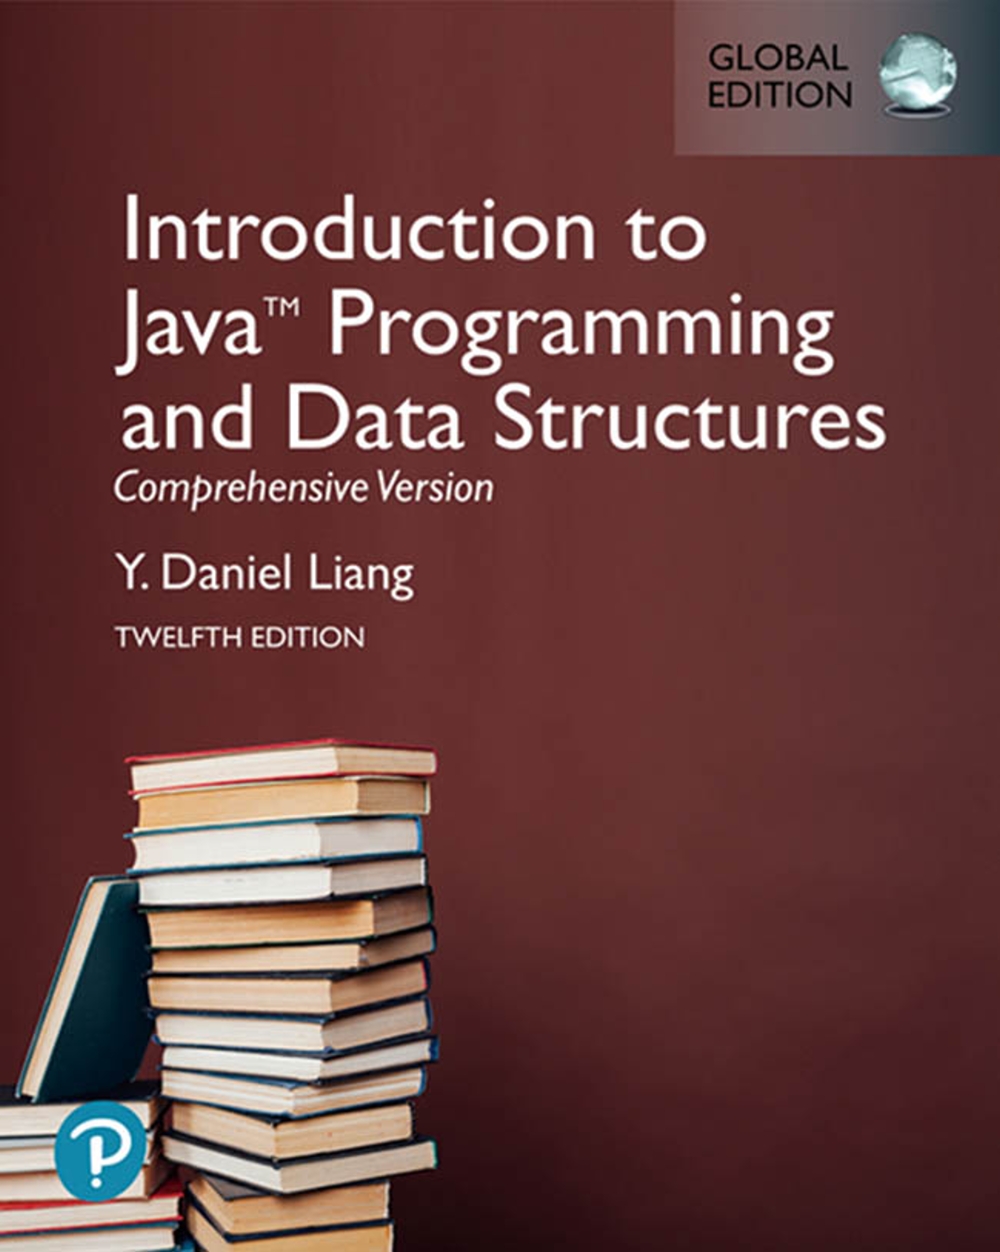 INTRODUCTION TO JAVA PROGRAMMING AND DATA STRUCTURES, COMPREHENSIVE VERSION 12/E (GE) 